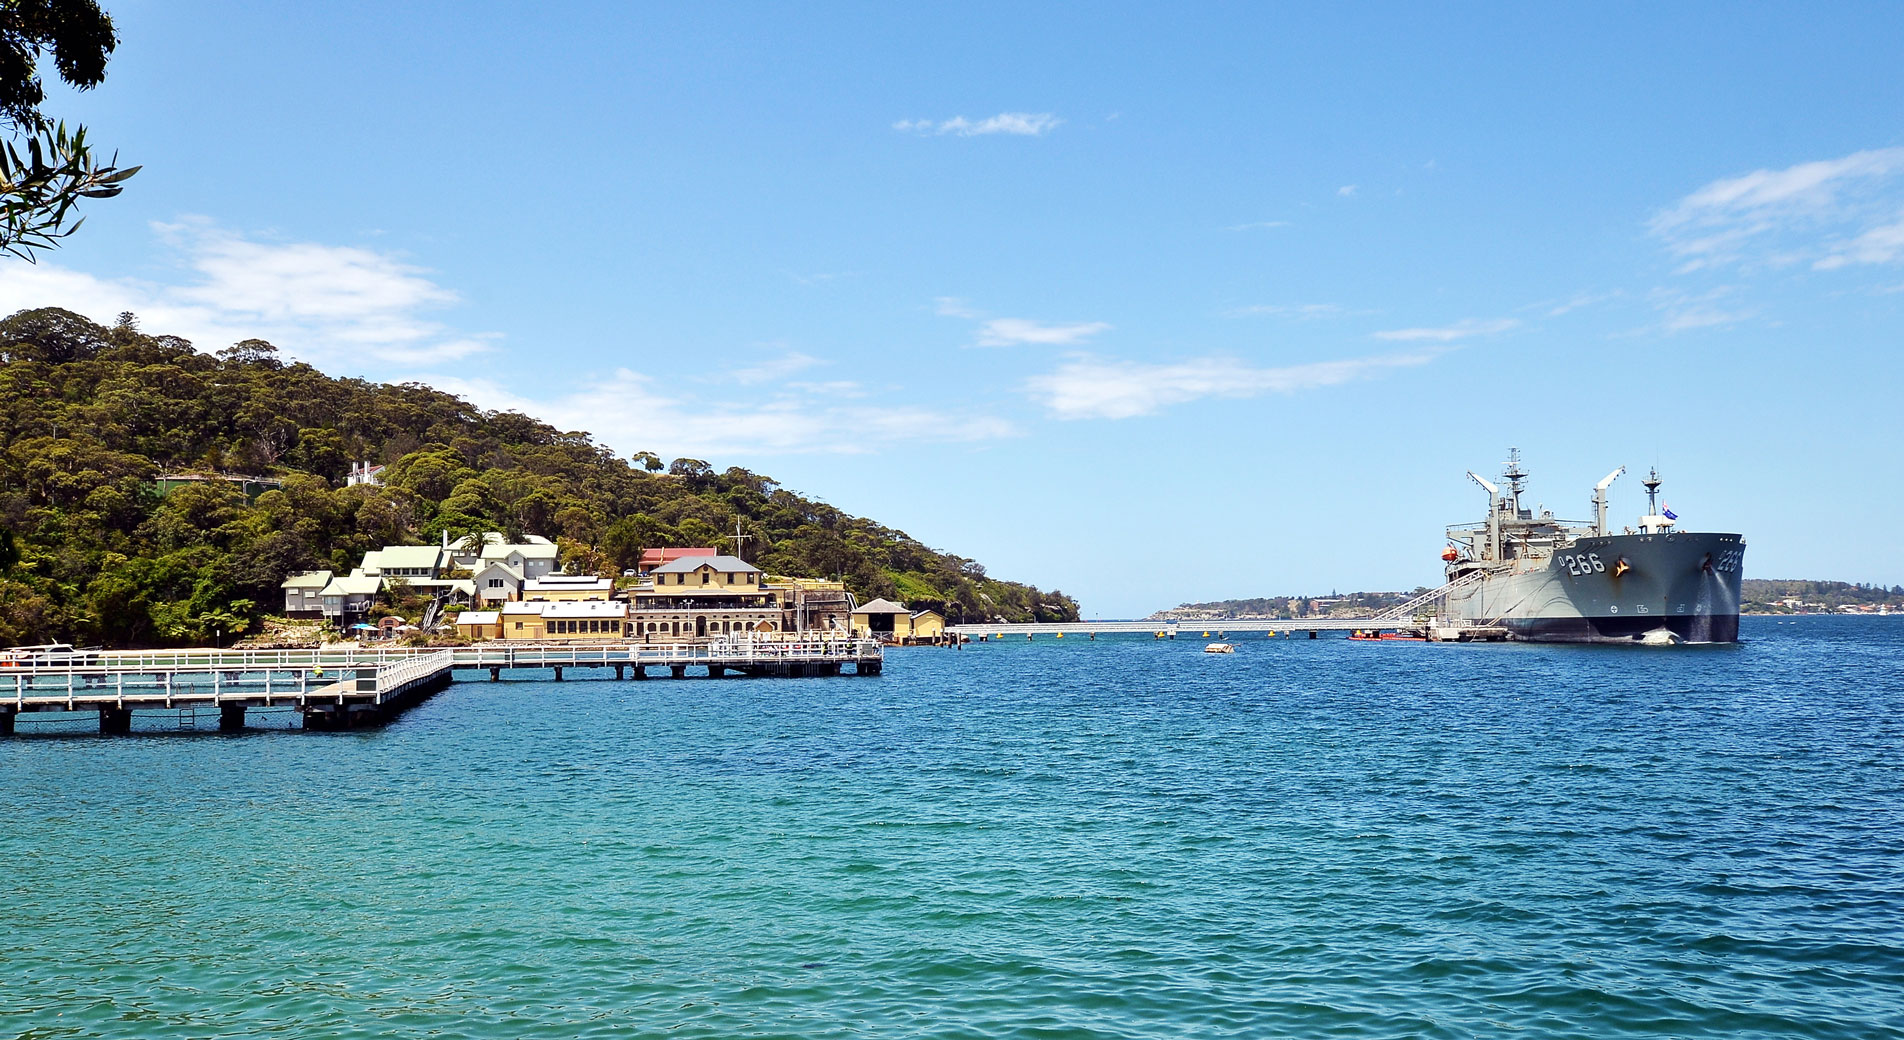 shot of chowder bay. naval ship on left side. right side, jetty, wharf, pavilion and bushland on right side. forefront of image is bright blue water. blue sky has sparse clouds.